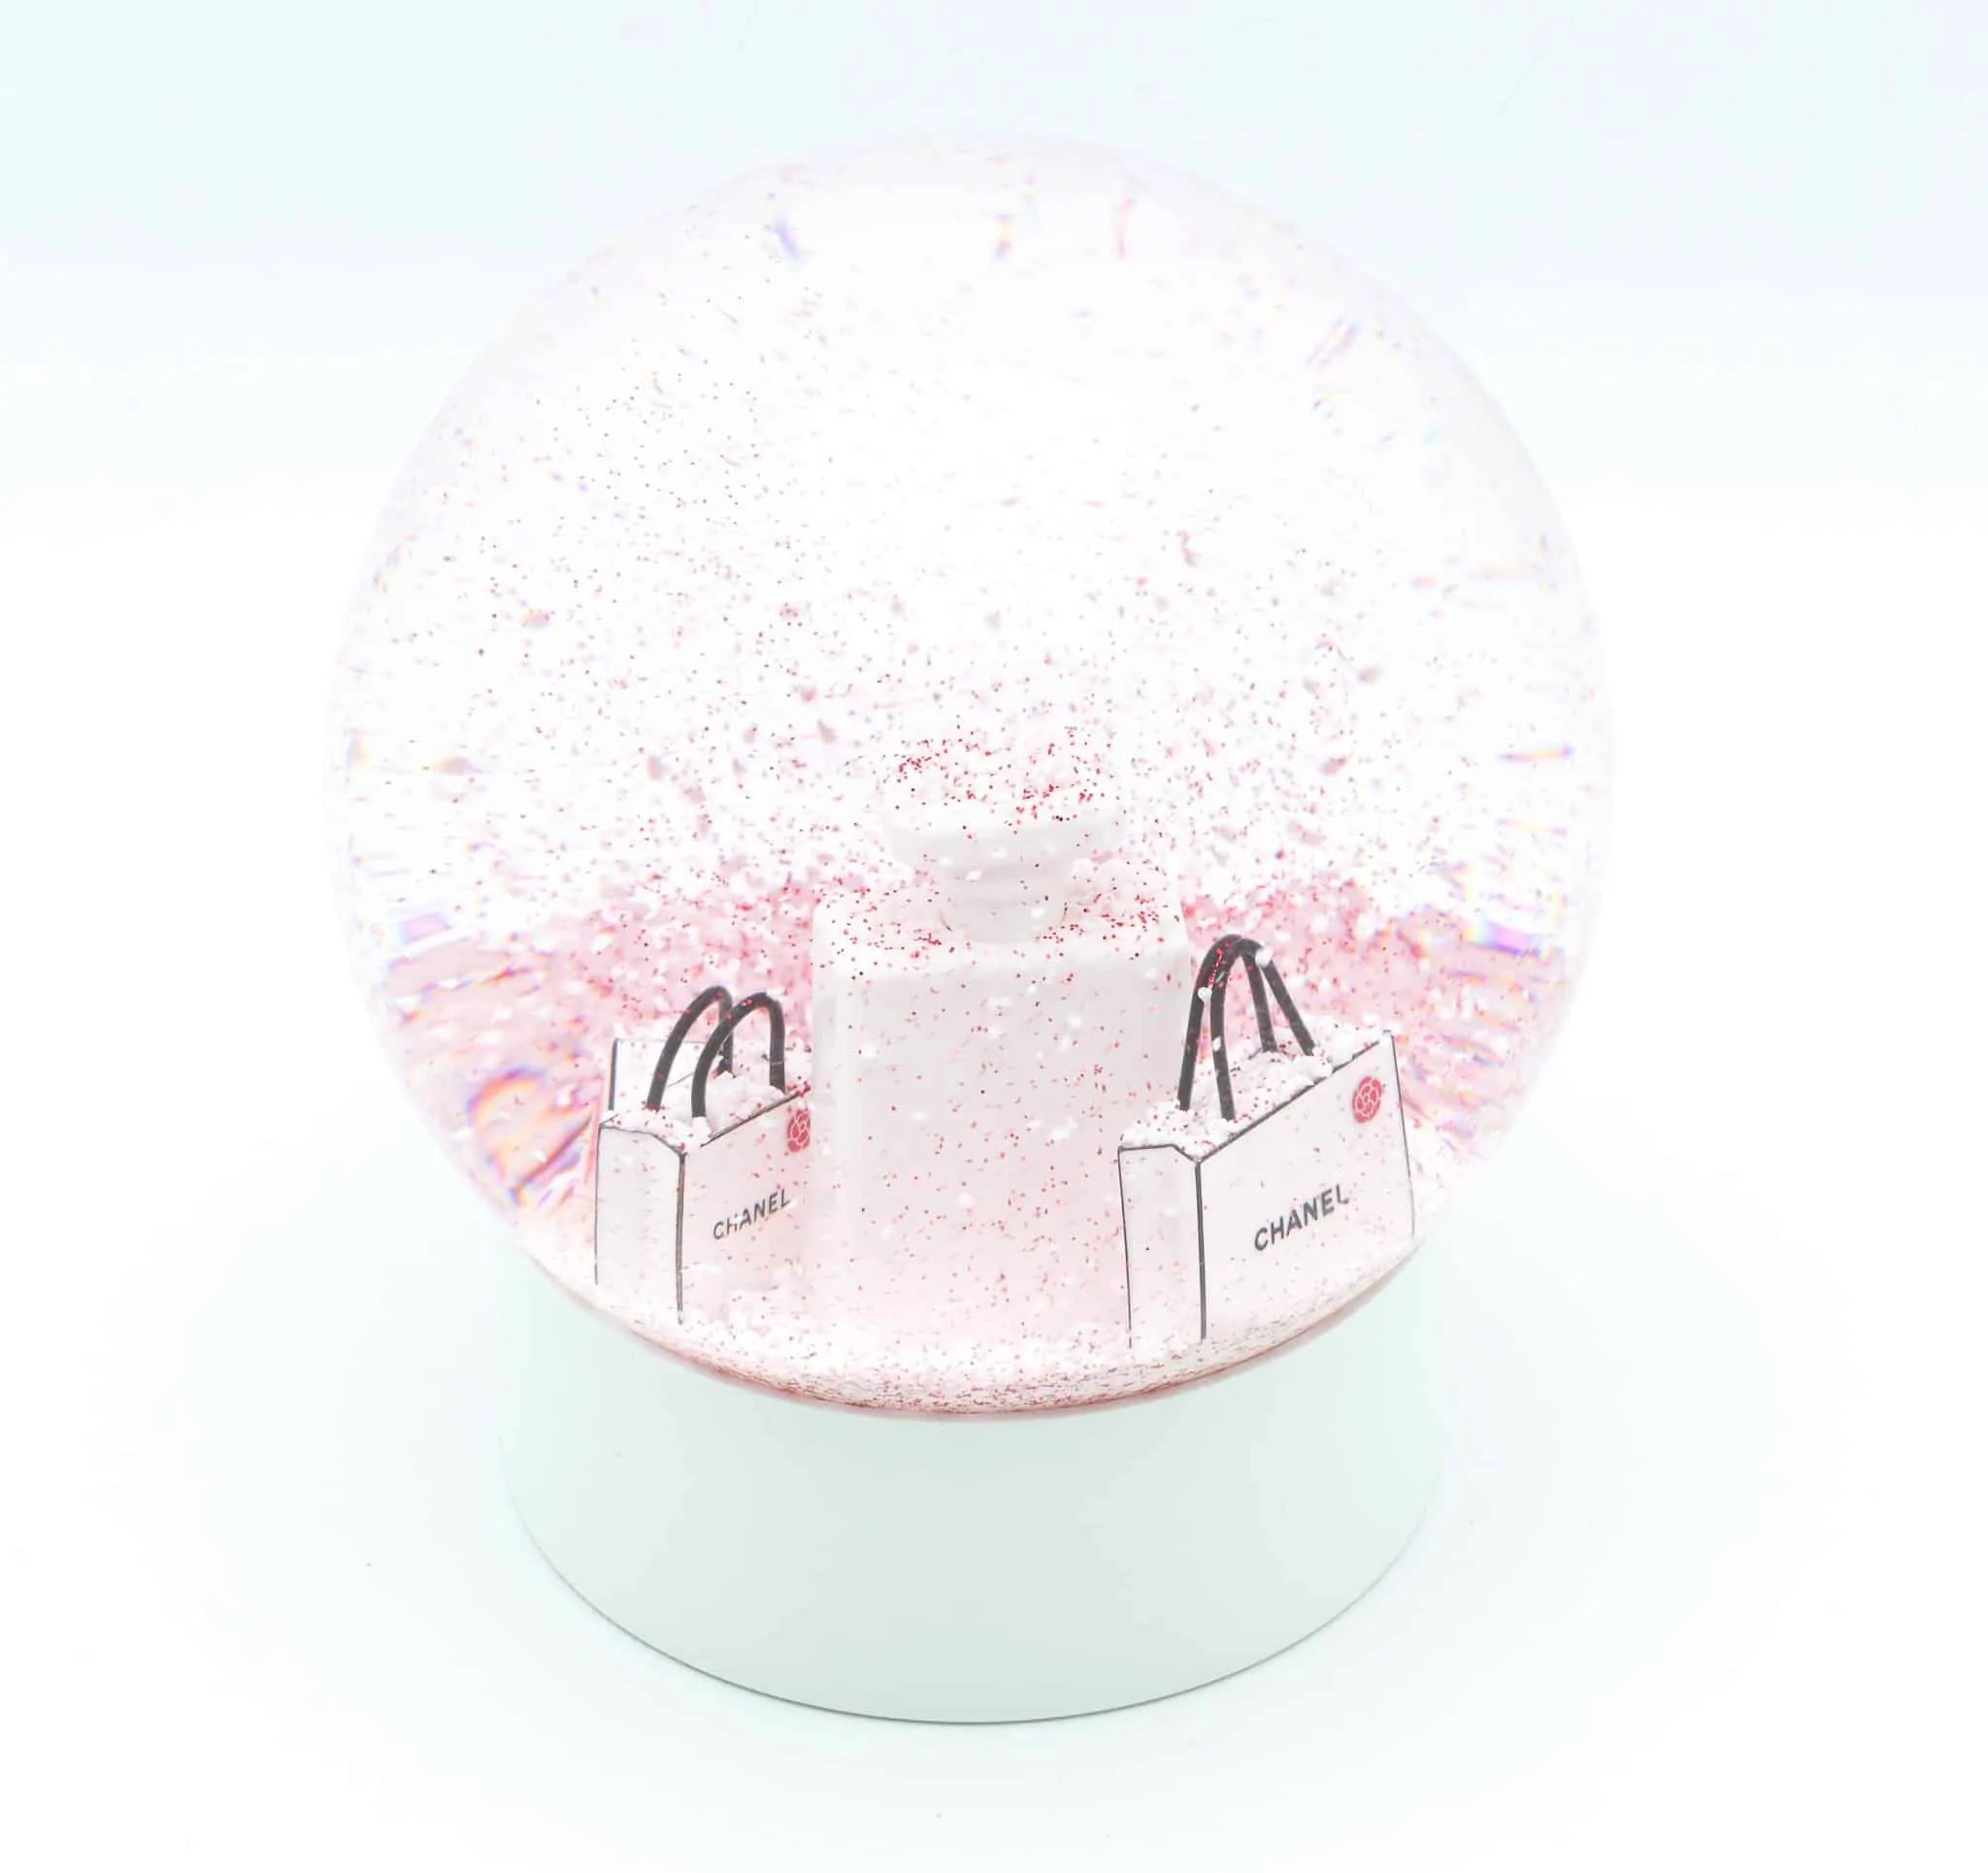 Chanel n°5 Limited Edition snow ball collector - Katheley's